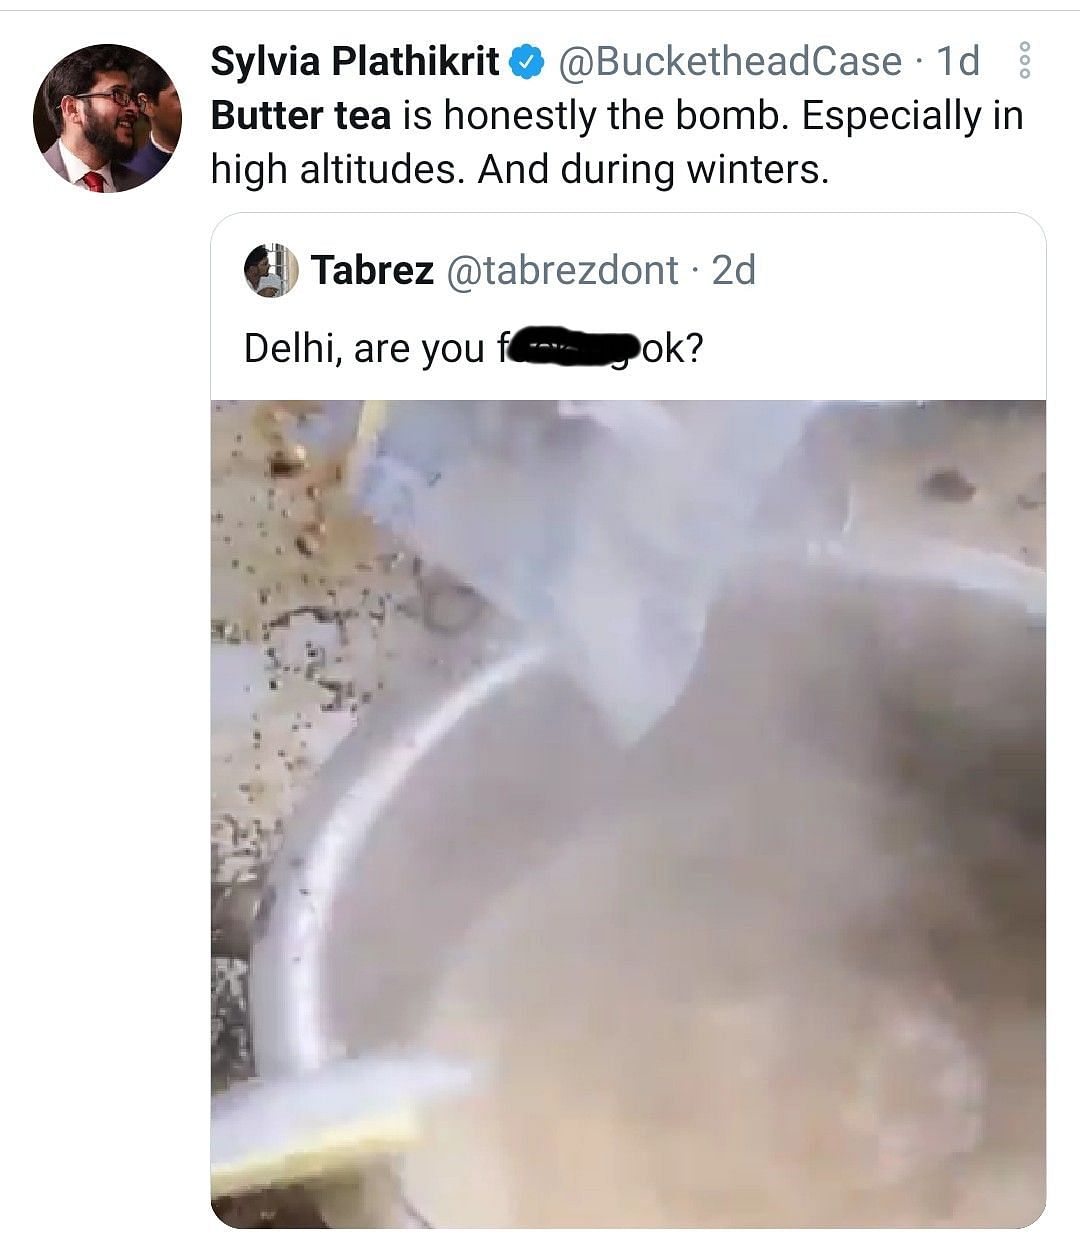 Butter tea seems to have left Team Chai divided.